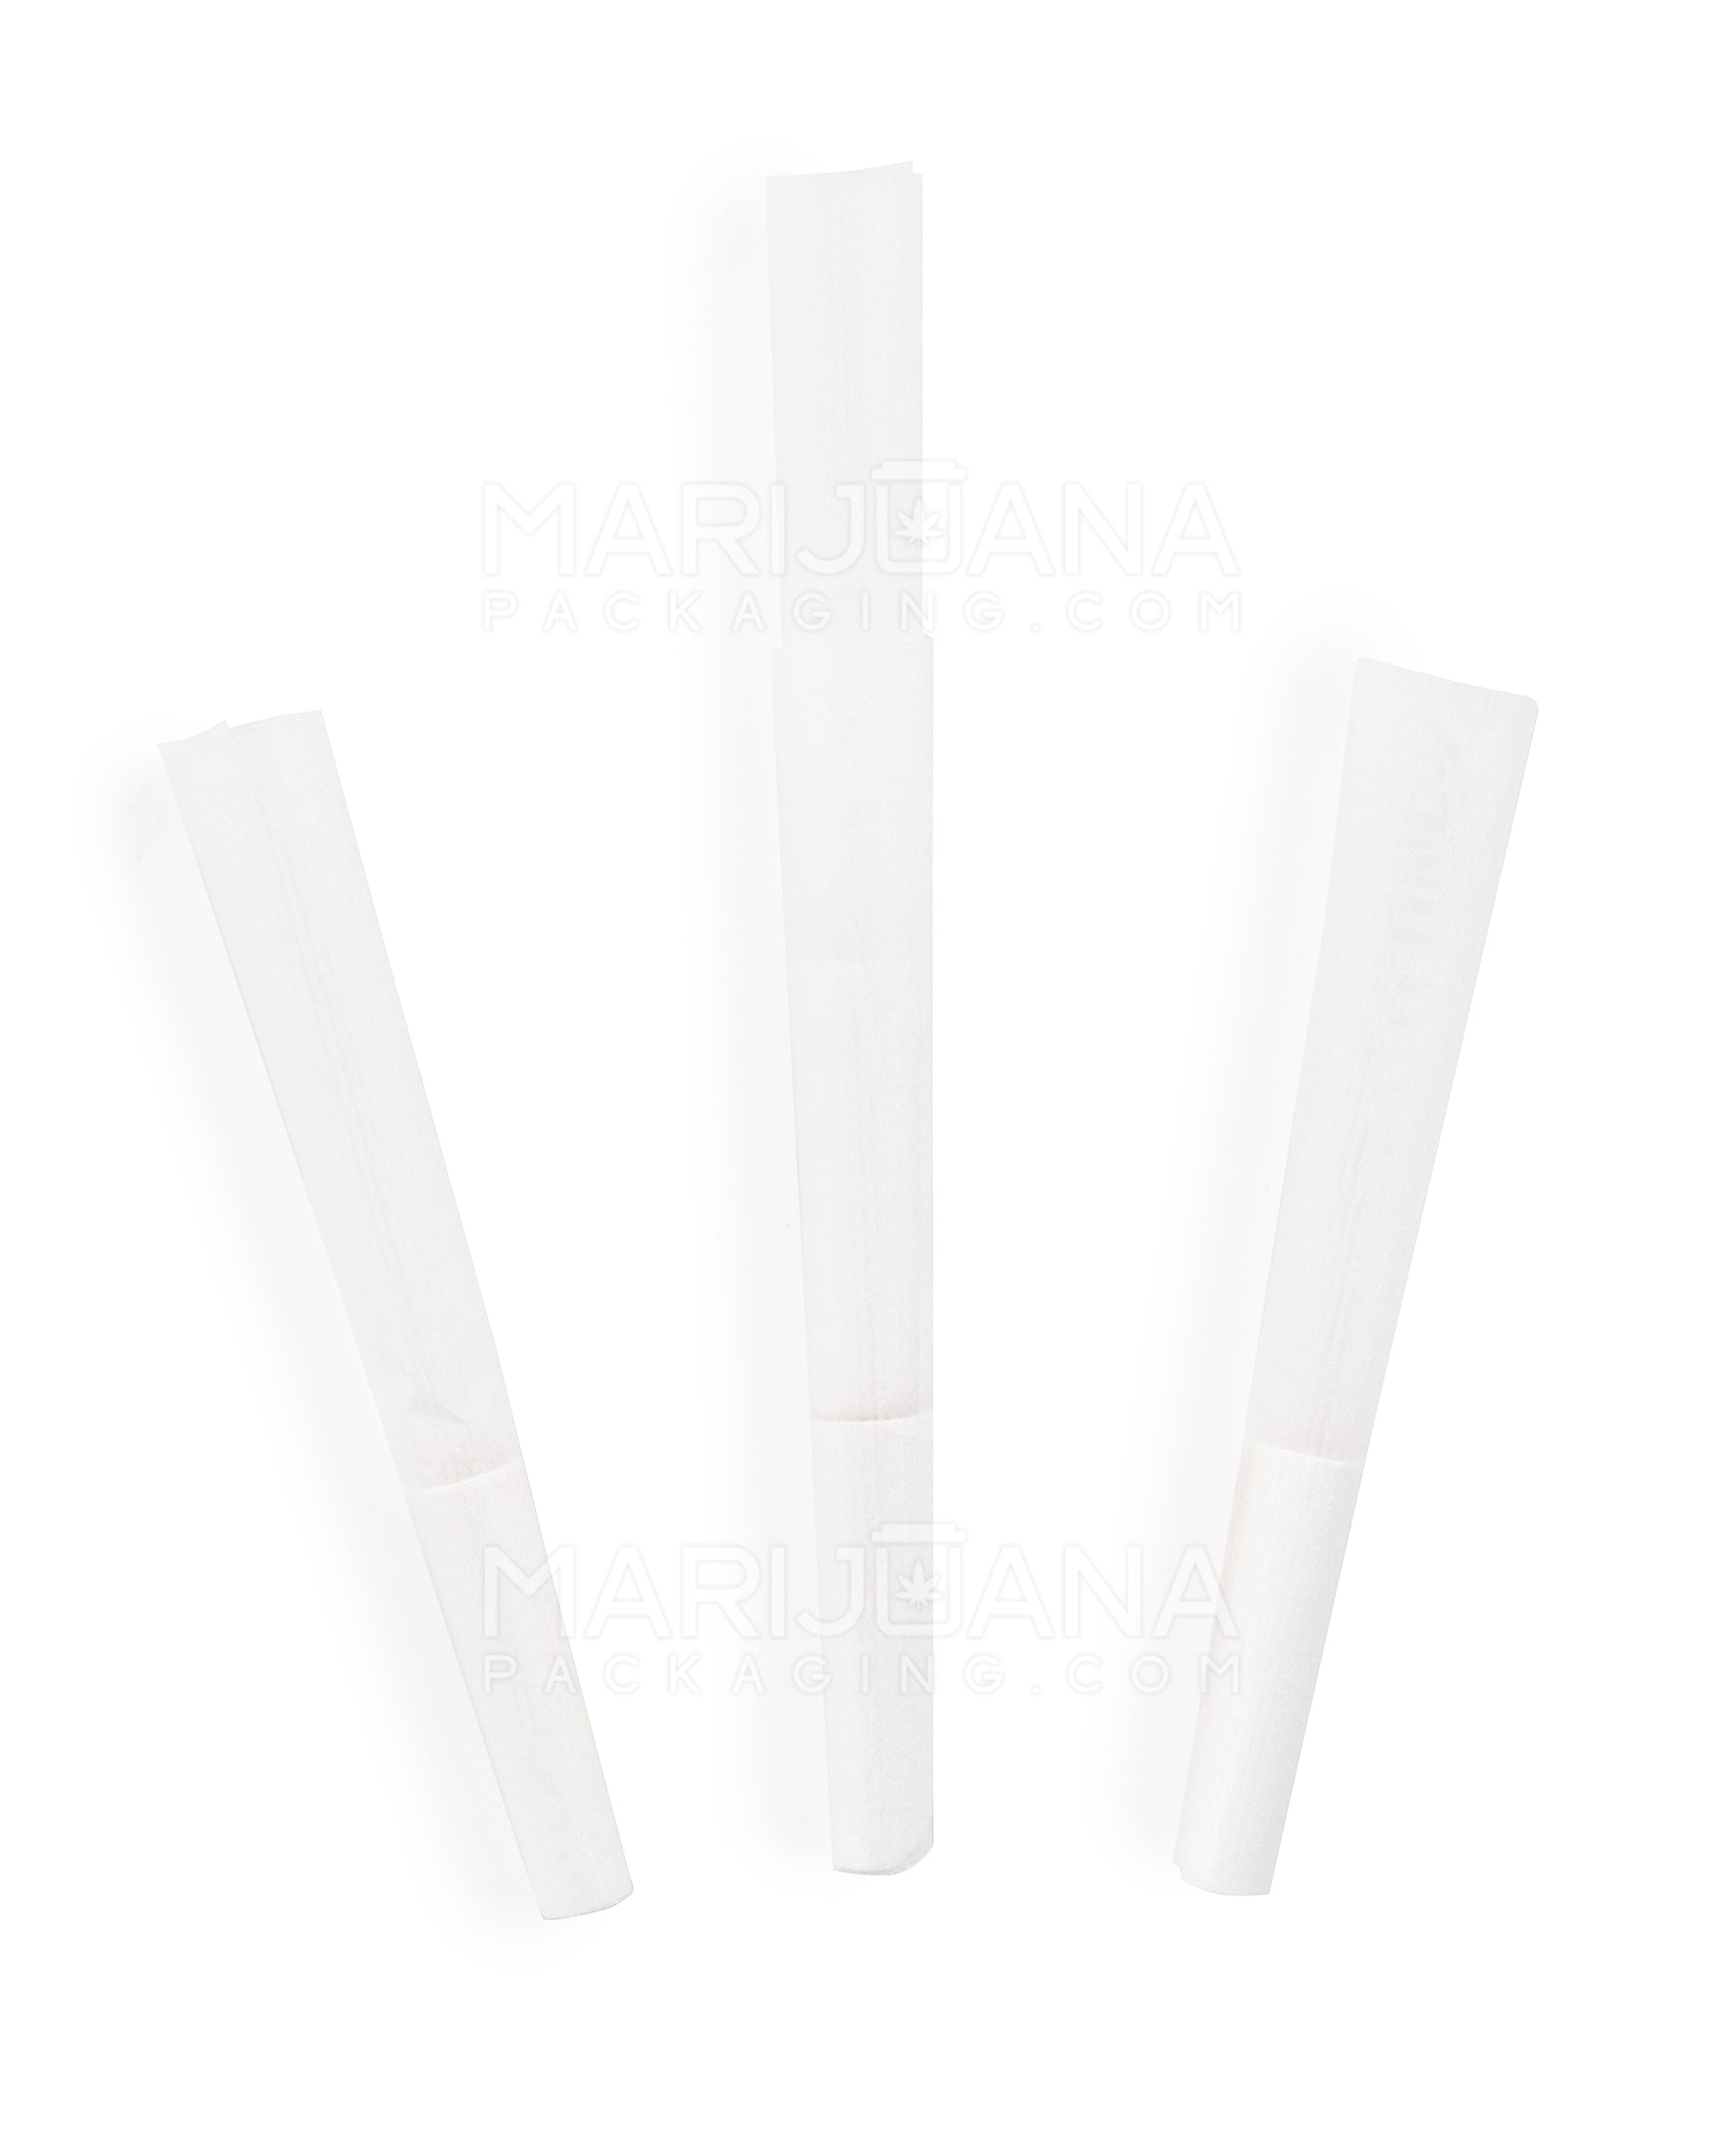 CONES | Dogwalker Size Pre-Rolled Cones | 70mm - Bleached Paper - 1000 Count